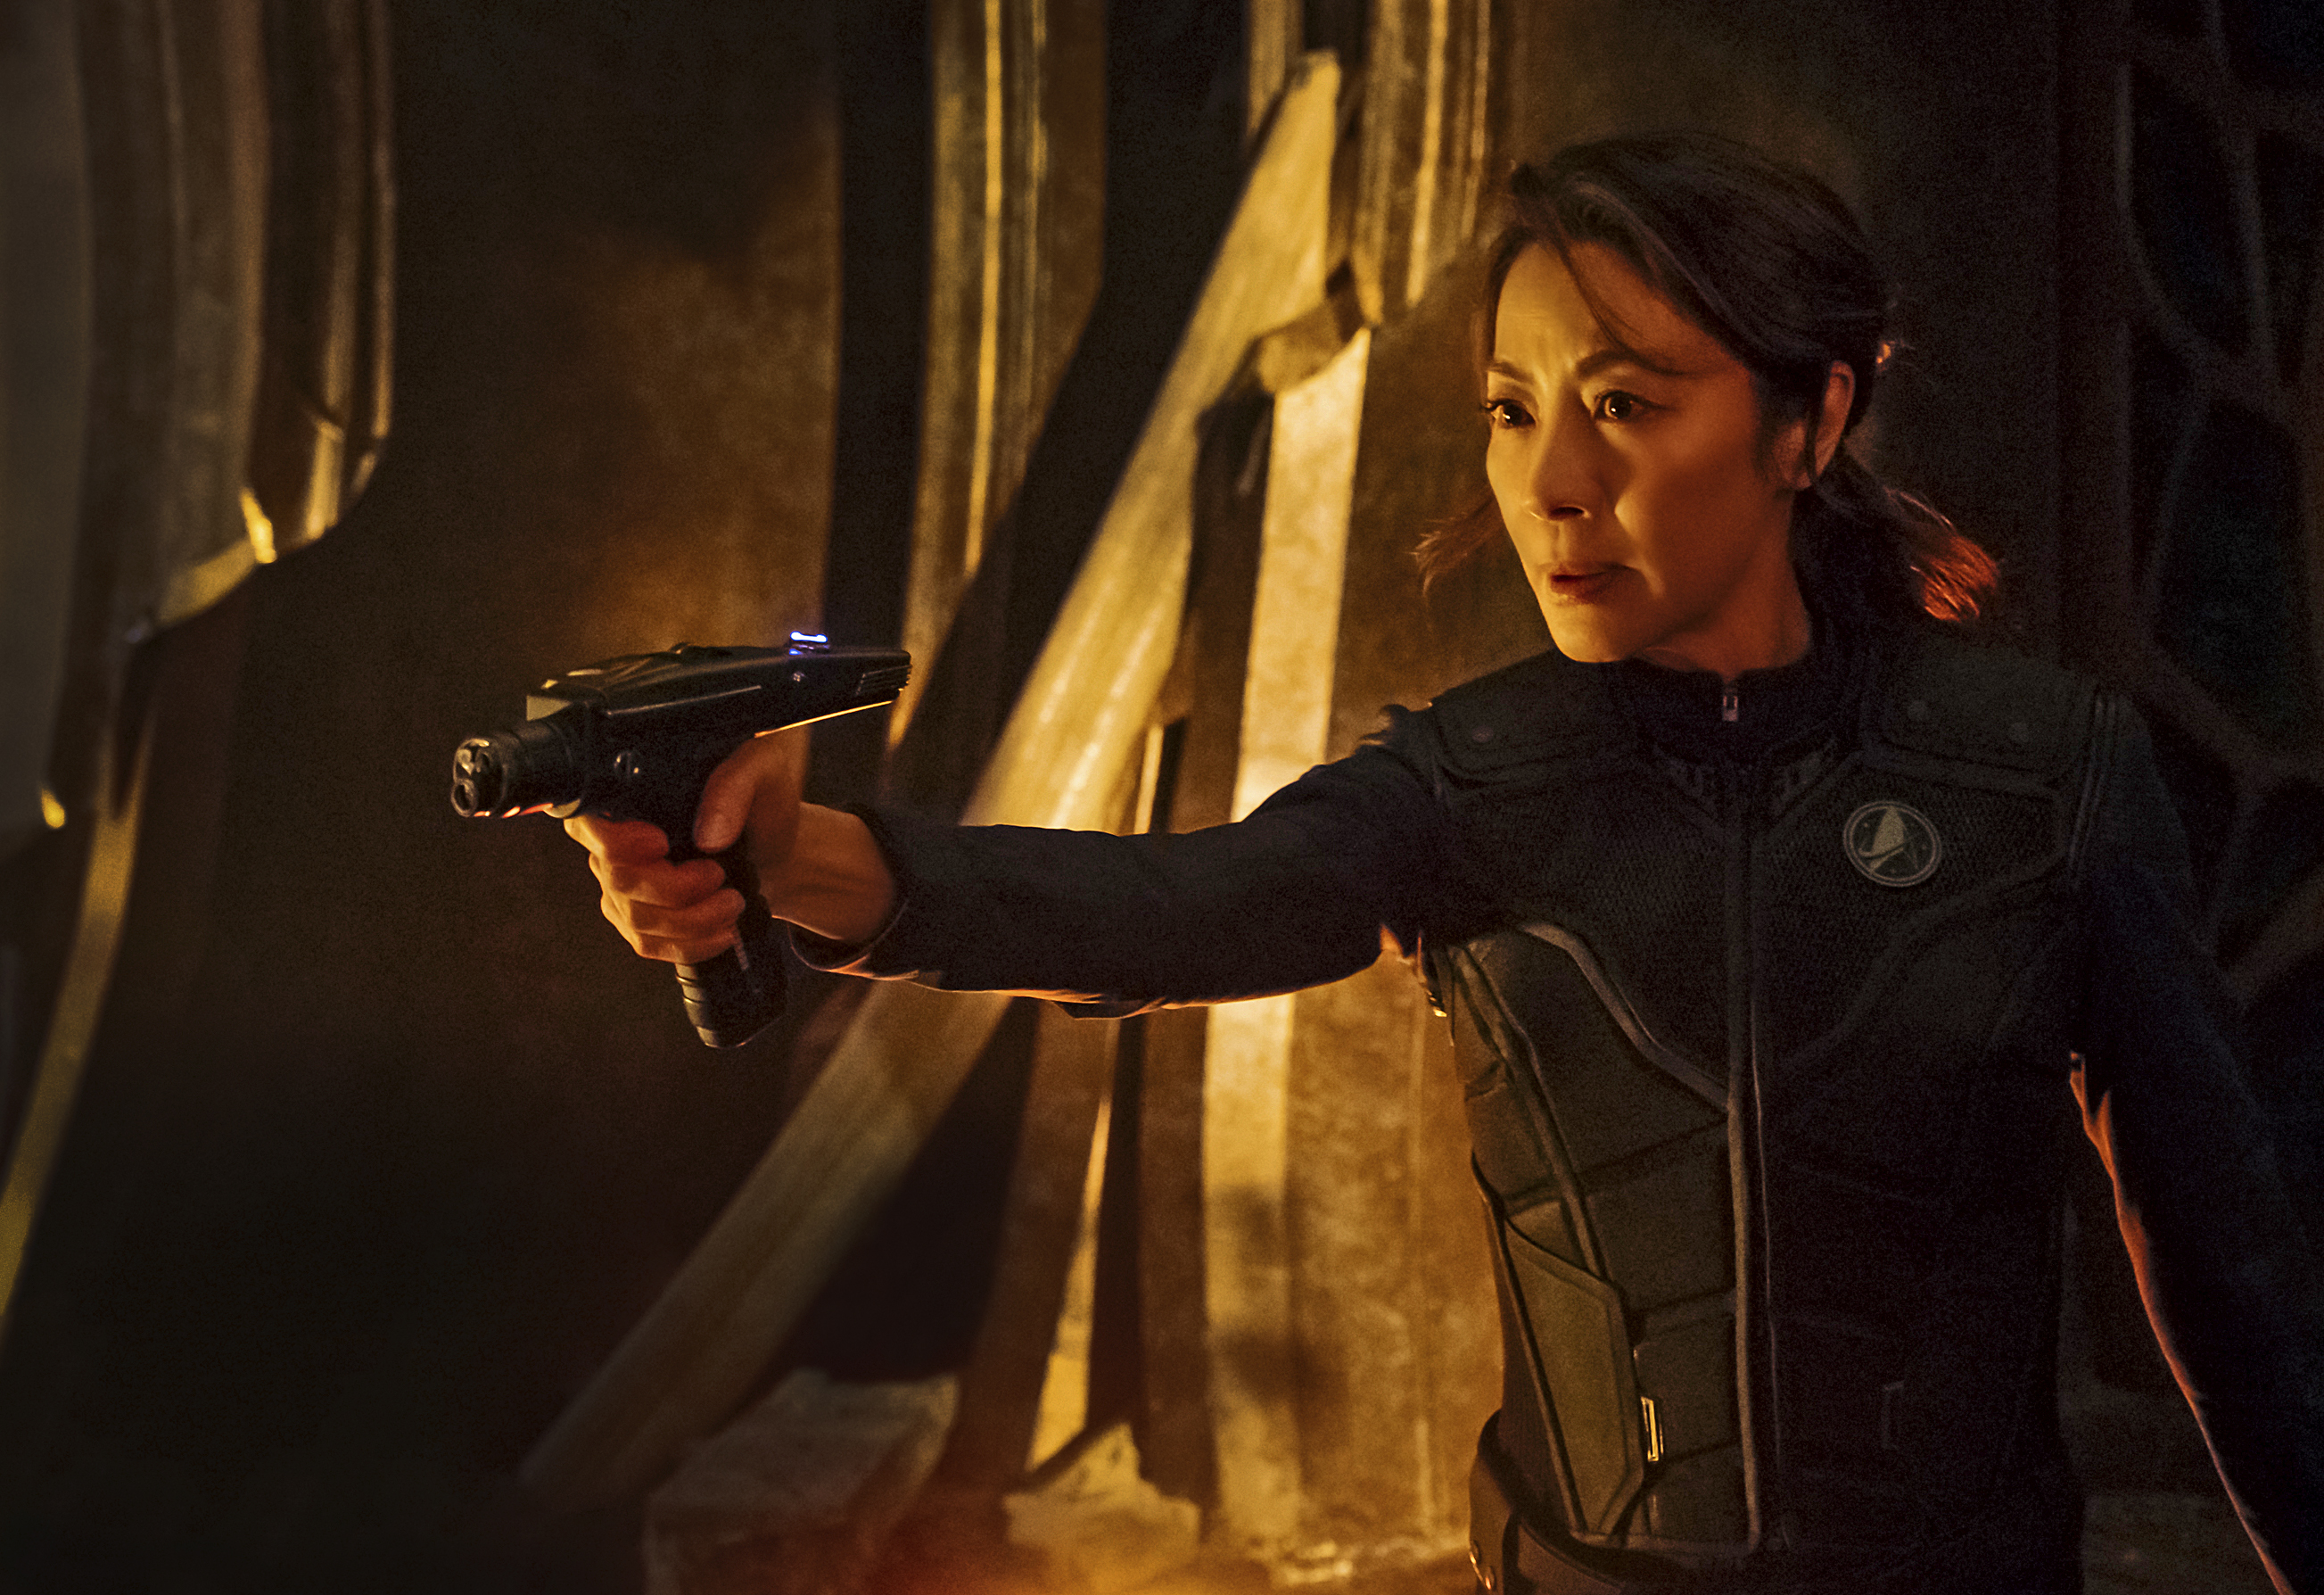 Pictured: Michelle Yeoh as Captain Philippa Georgiou. STAR TREK: DISCOVERY coming to CBS All Access.  Photo Cr: Jan Thijs  ï¿½ 2017 CBS Interactive. All Rights Reserved.